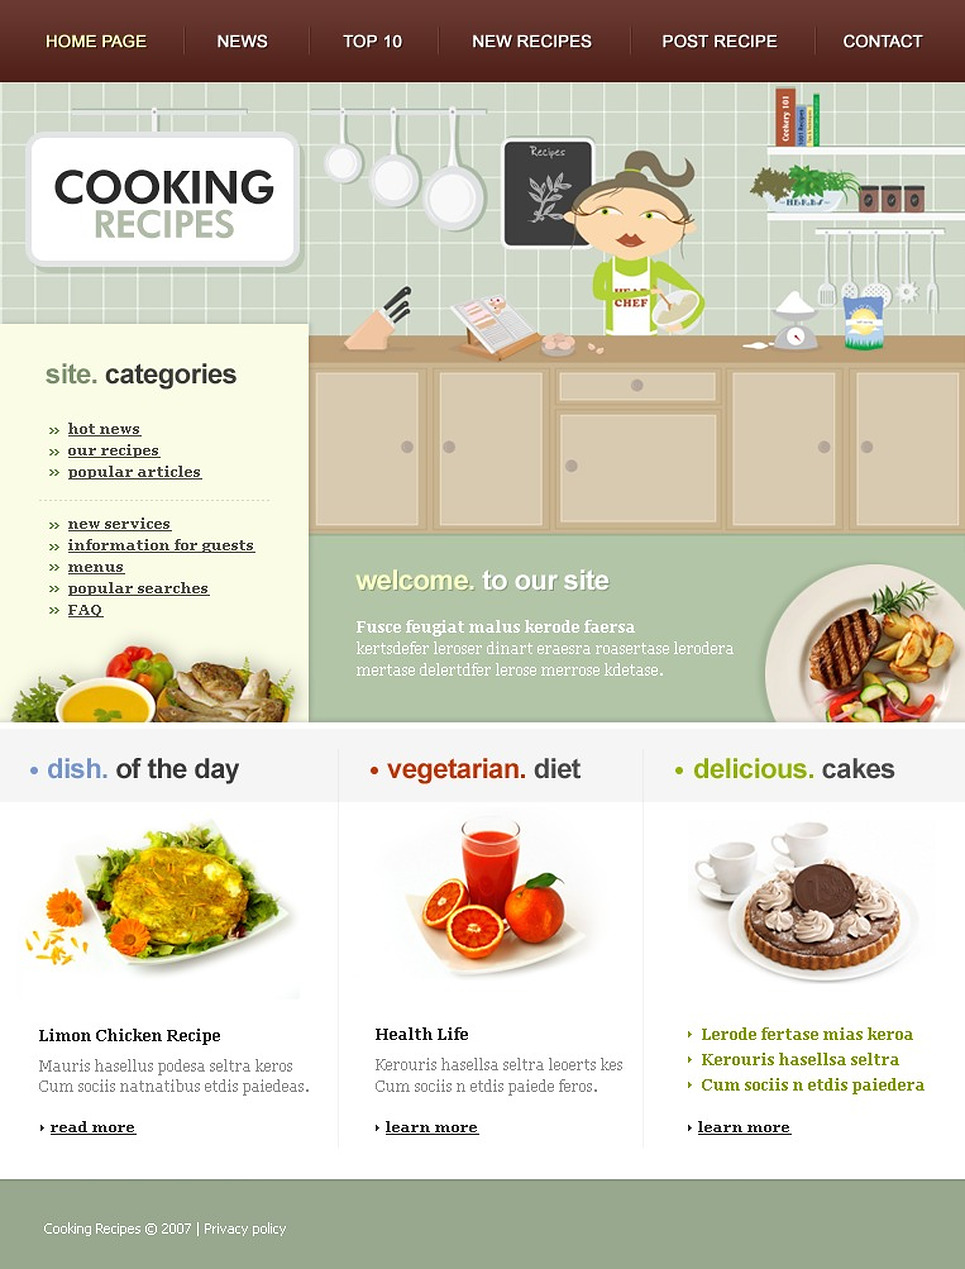 Site categories. Recipes for Cooking шаблон. Cook website. Recipe site.